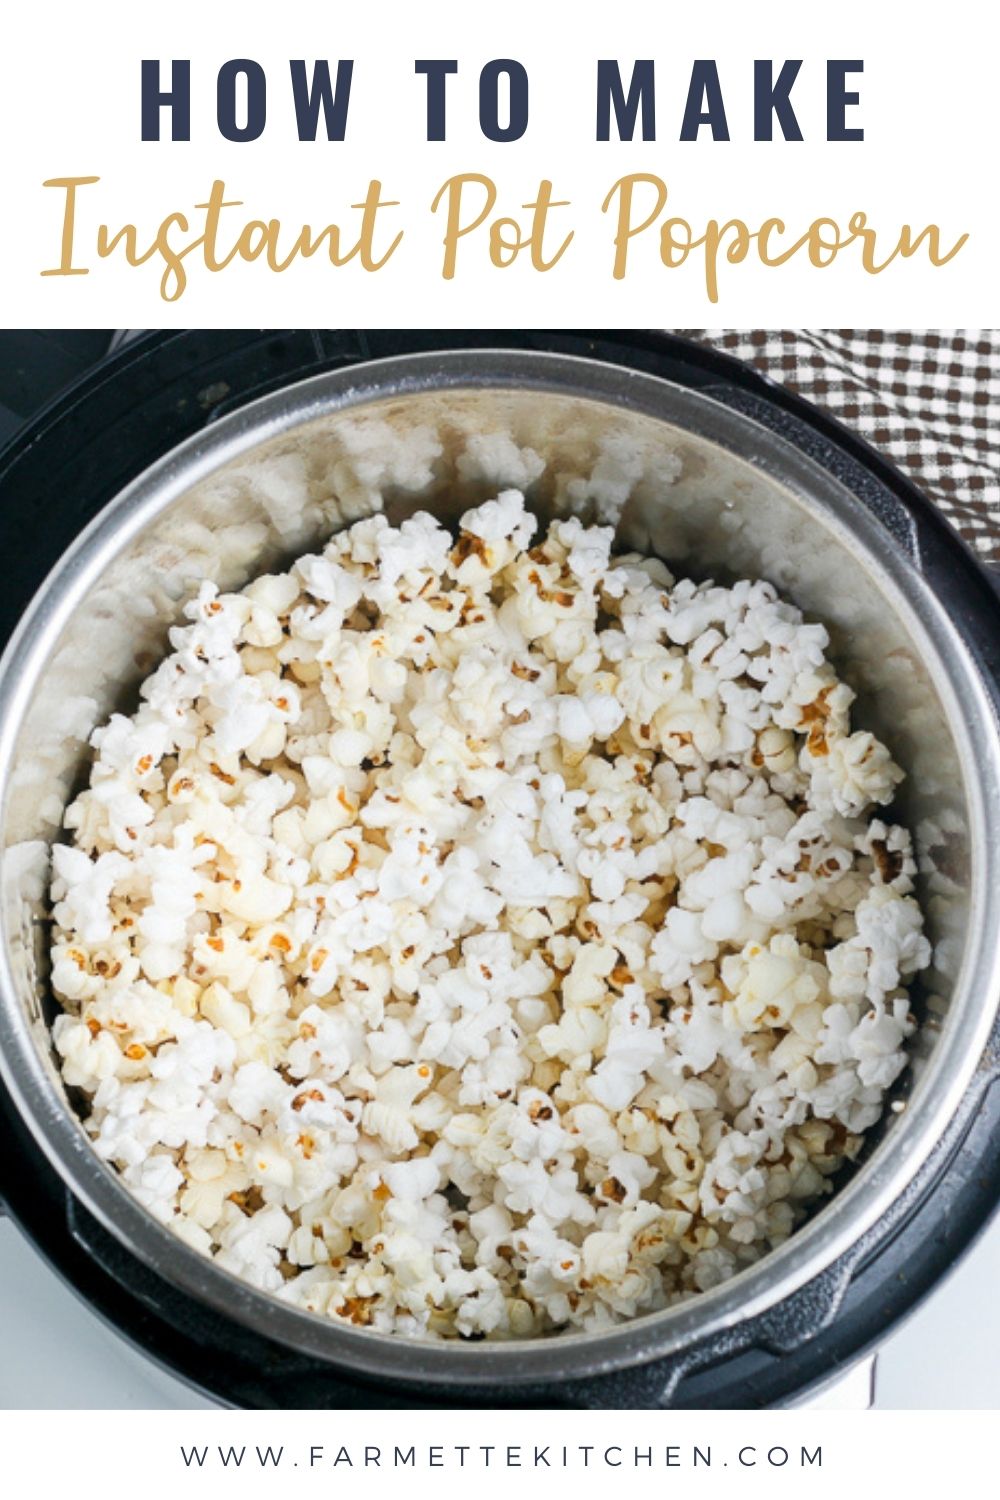 Instant Pot Popcorn - The Easiest and Best Method! | Farmette Kitchen